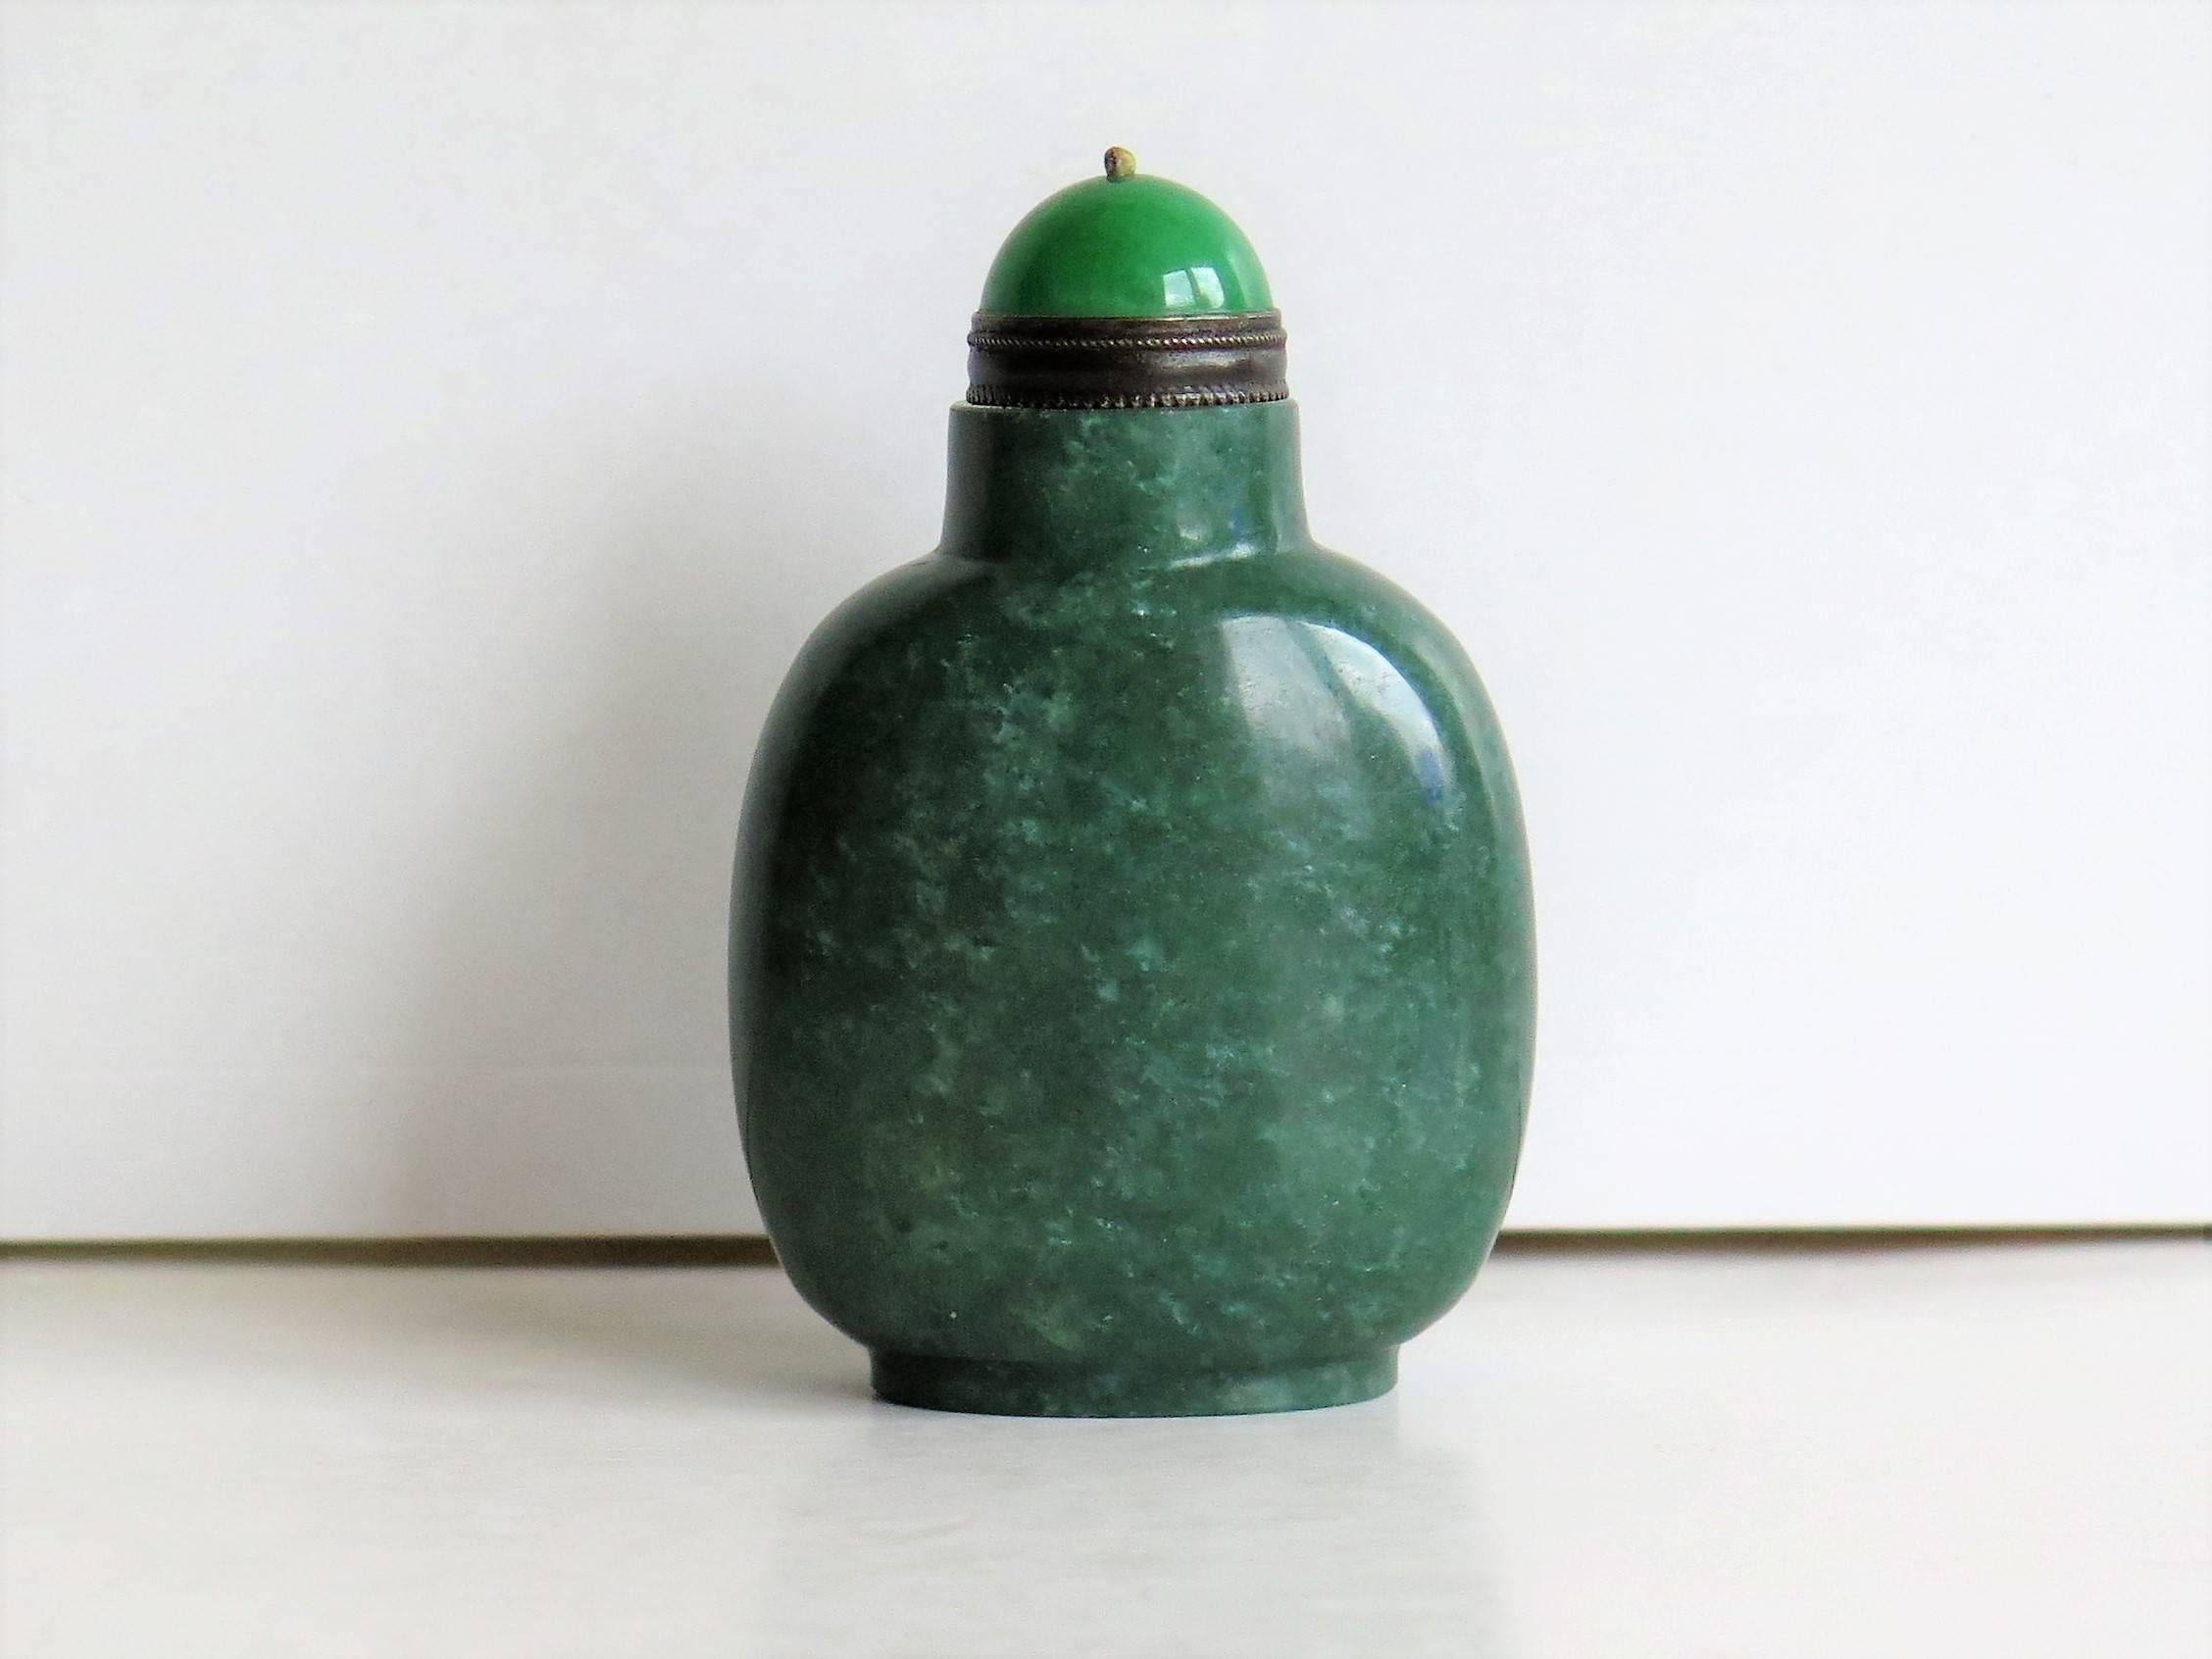 This is a good and very decorative Chinese snuff bottle from the early-mid-20th century, circa 1920s.

The bottle is made of hand-carved agate which is a natural hard stone. The bottle has a rounded baluster shape, set on a low foot. The agate has